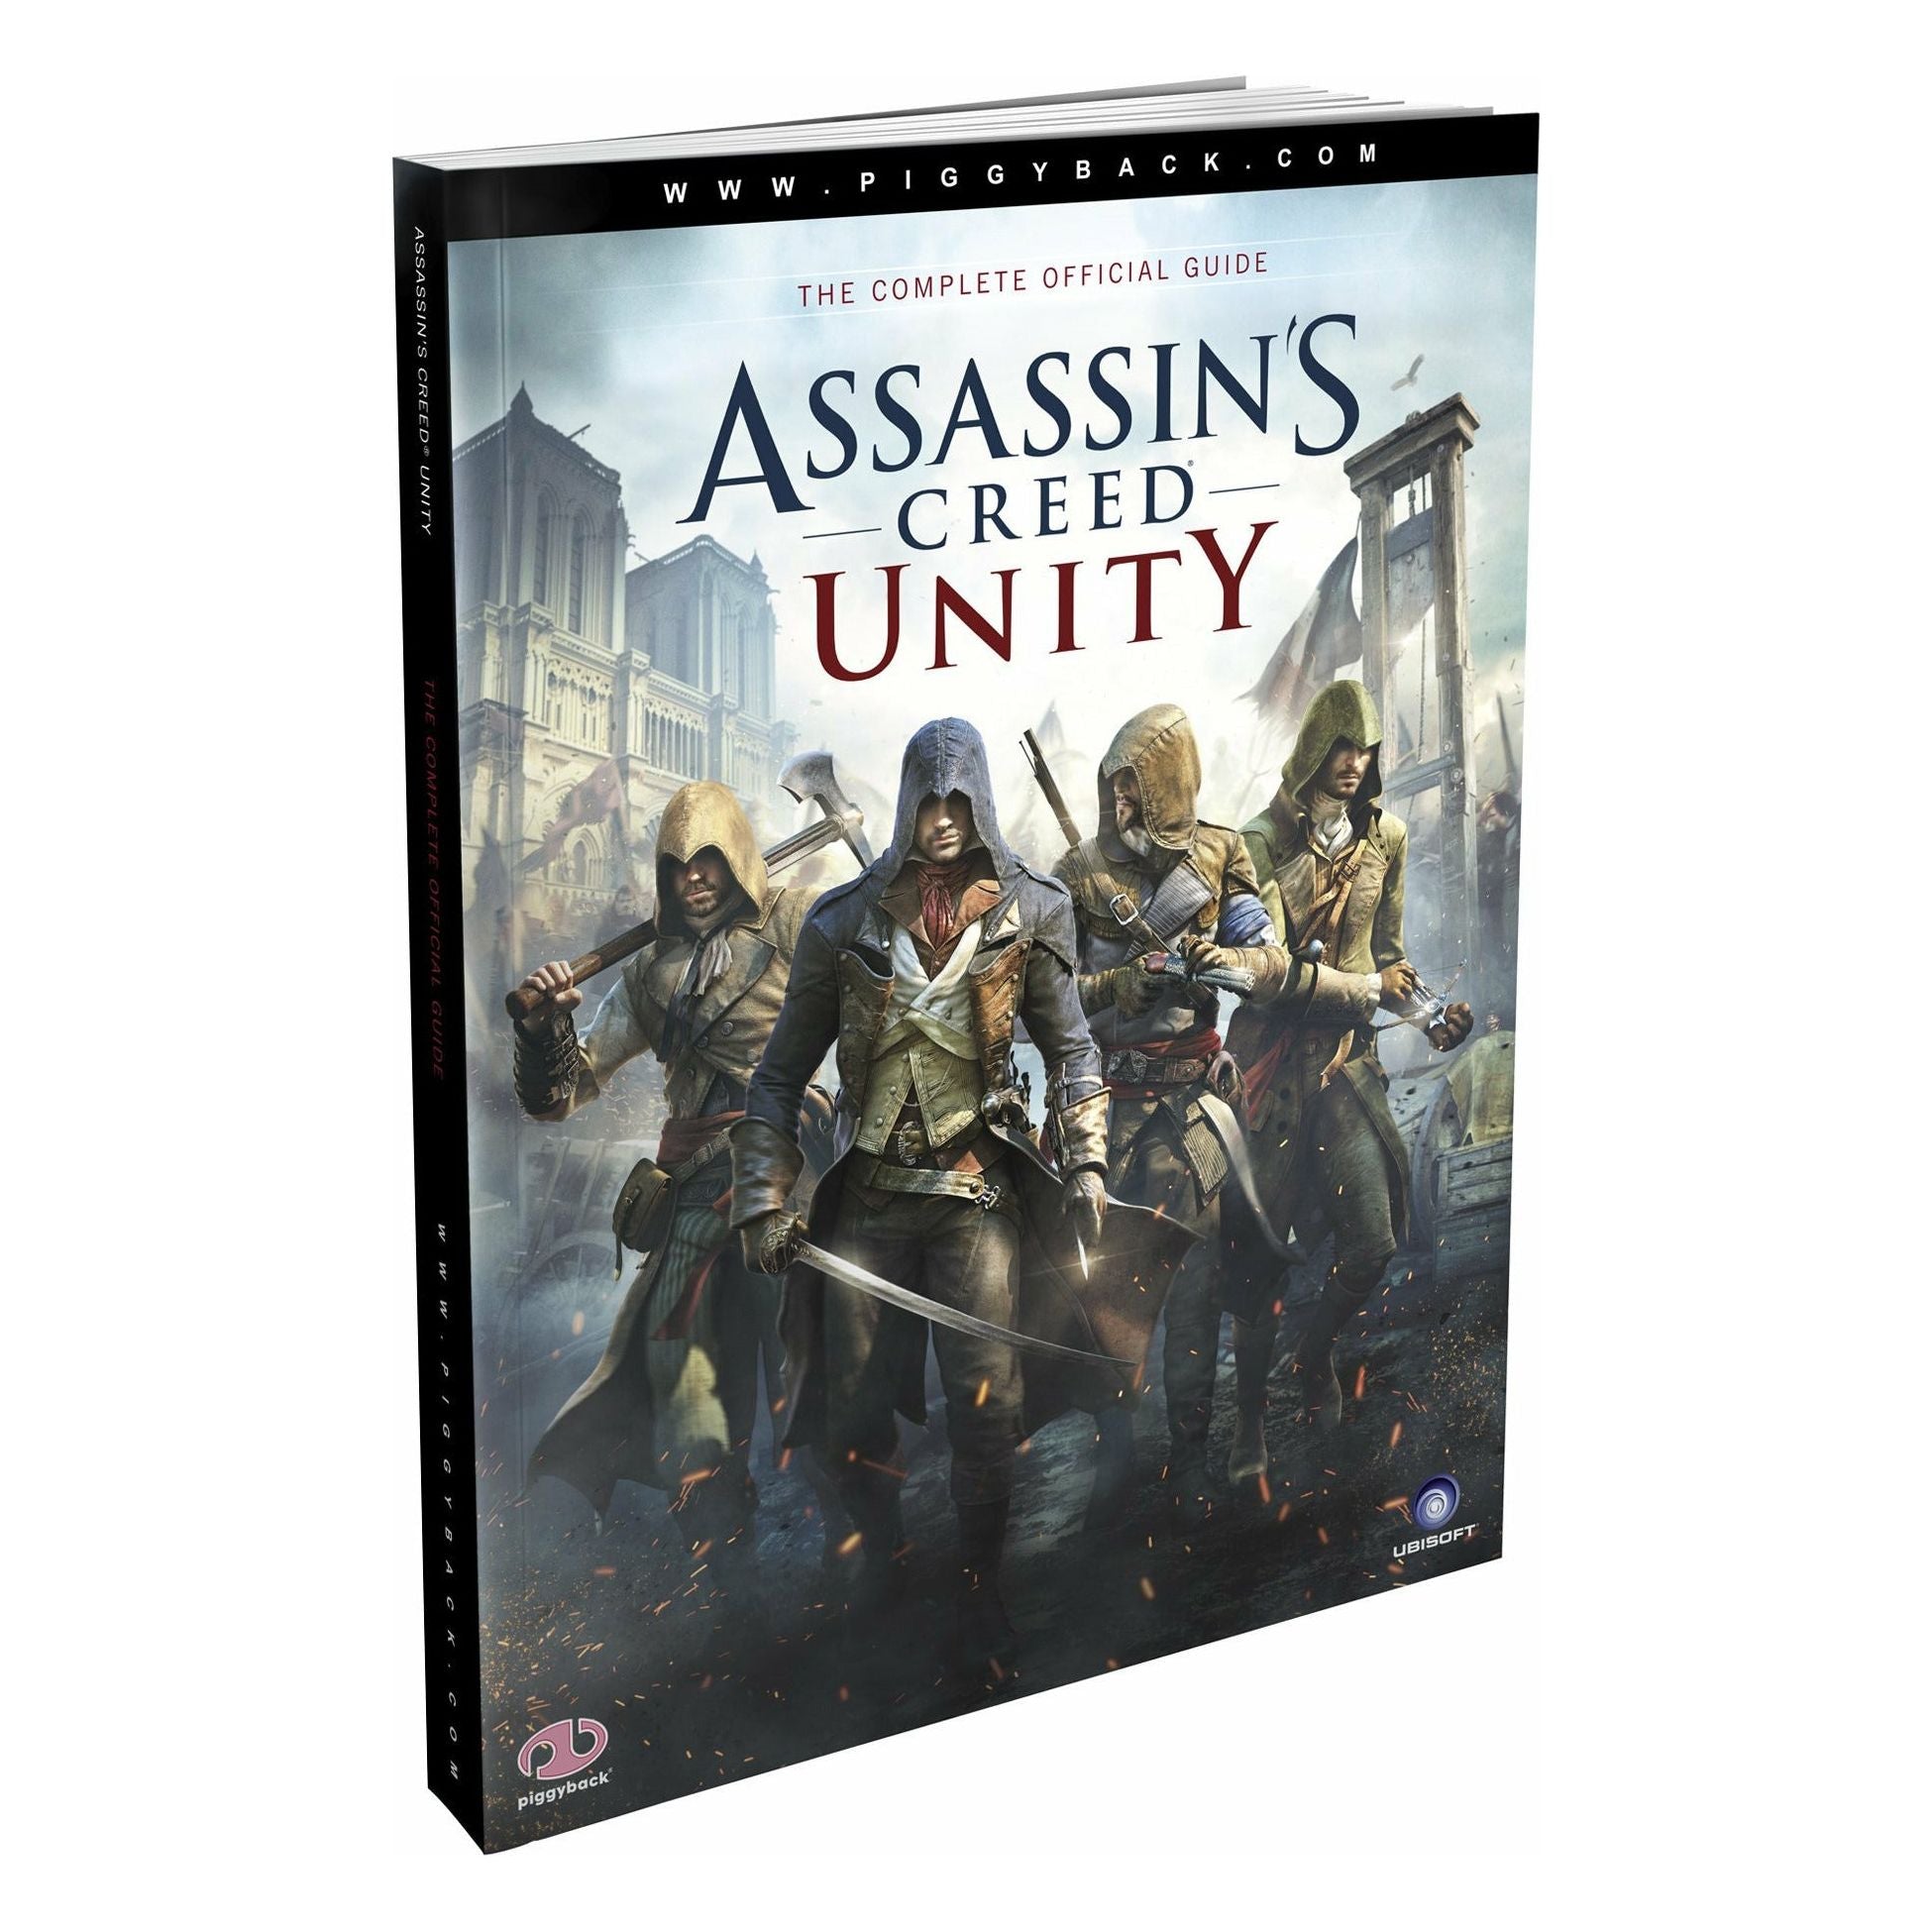 Assassin's Creed Unity Le guide officiel complet